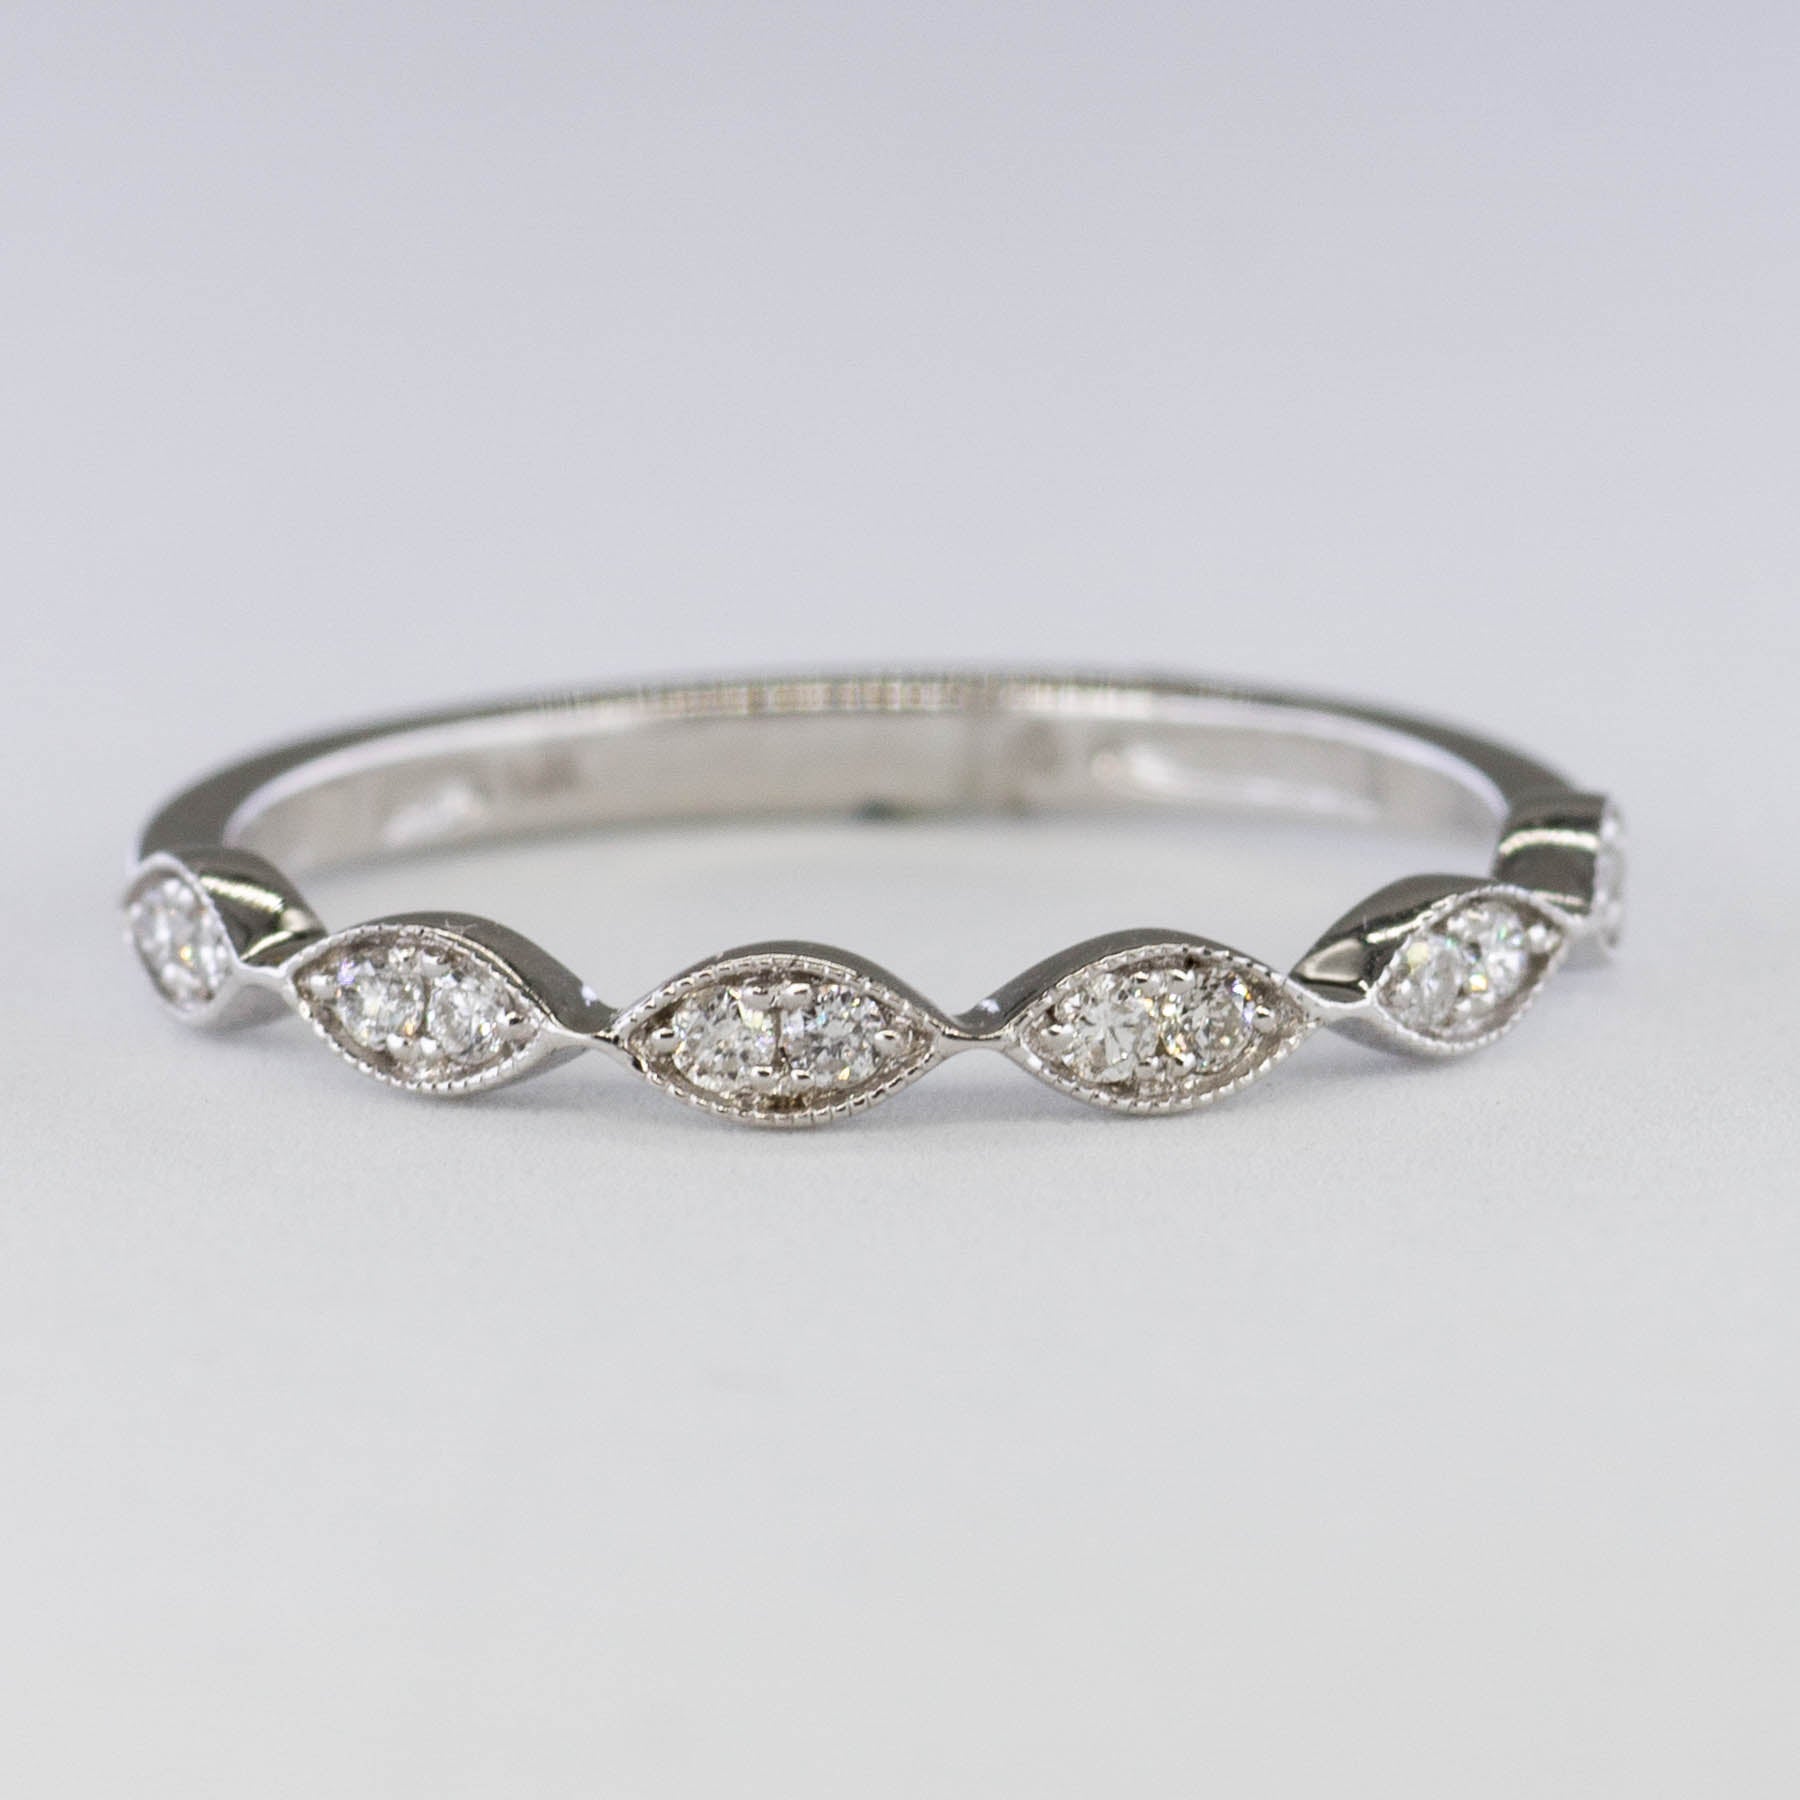 '100 Ways' Art Deco Inspired Wedding Bands | Options Available | 0.15ctw | - 100 Ways